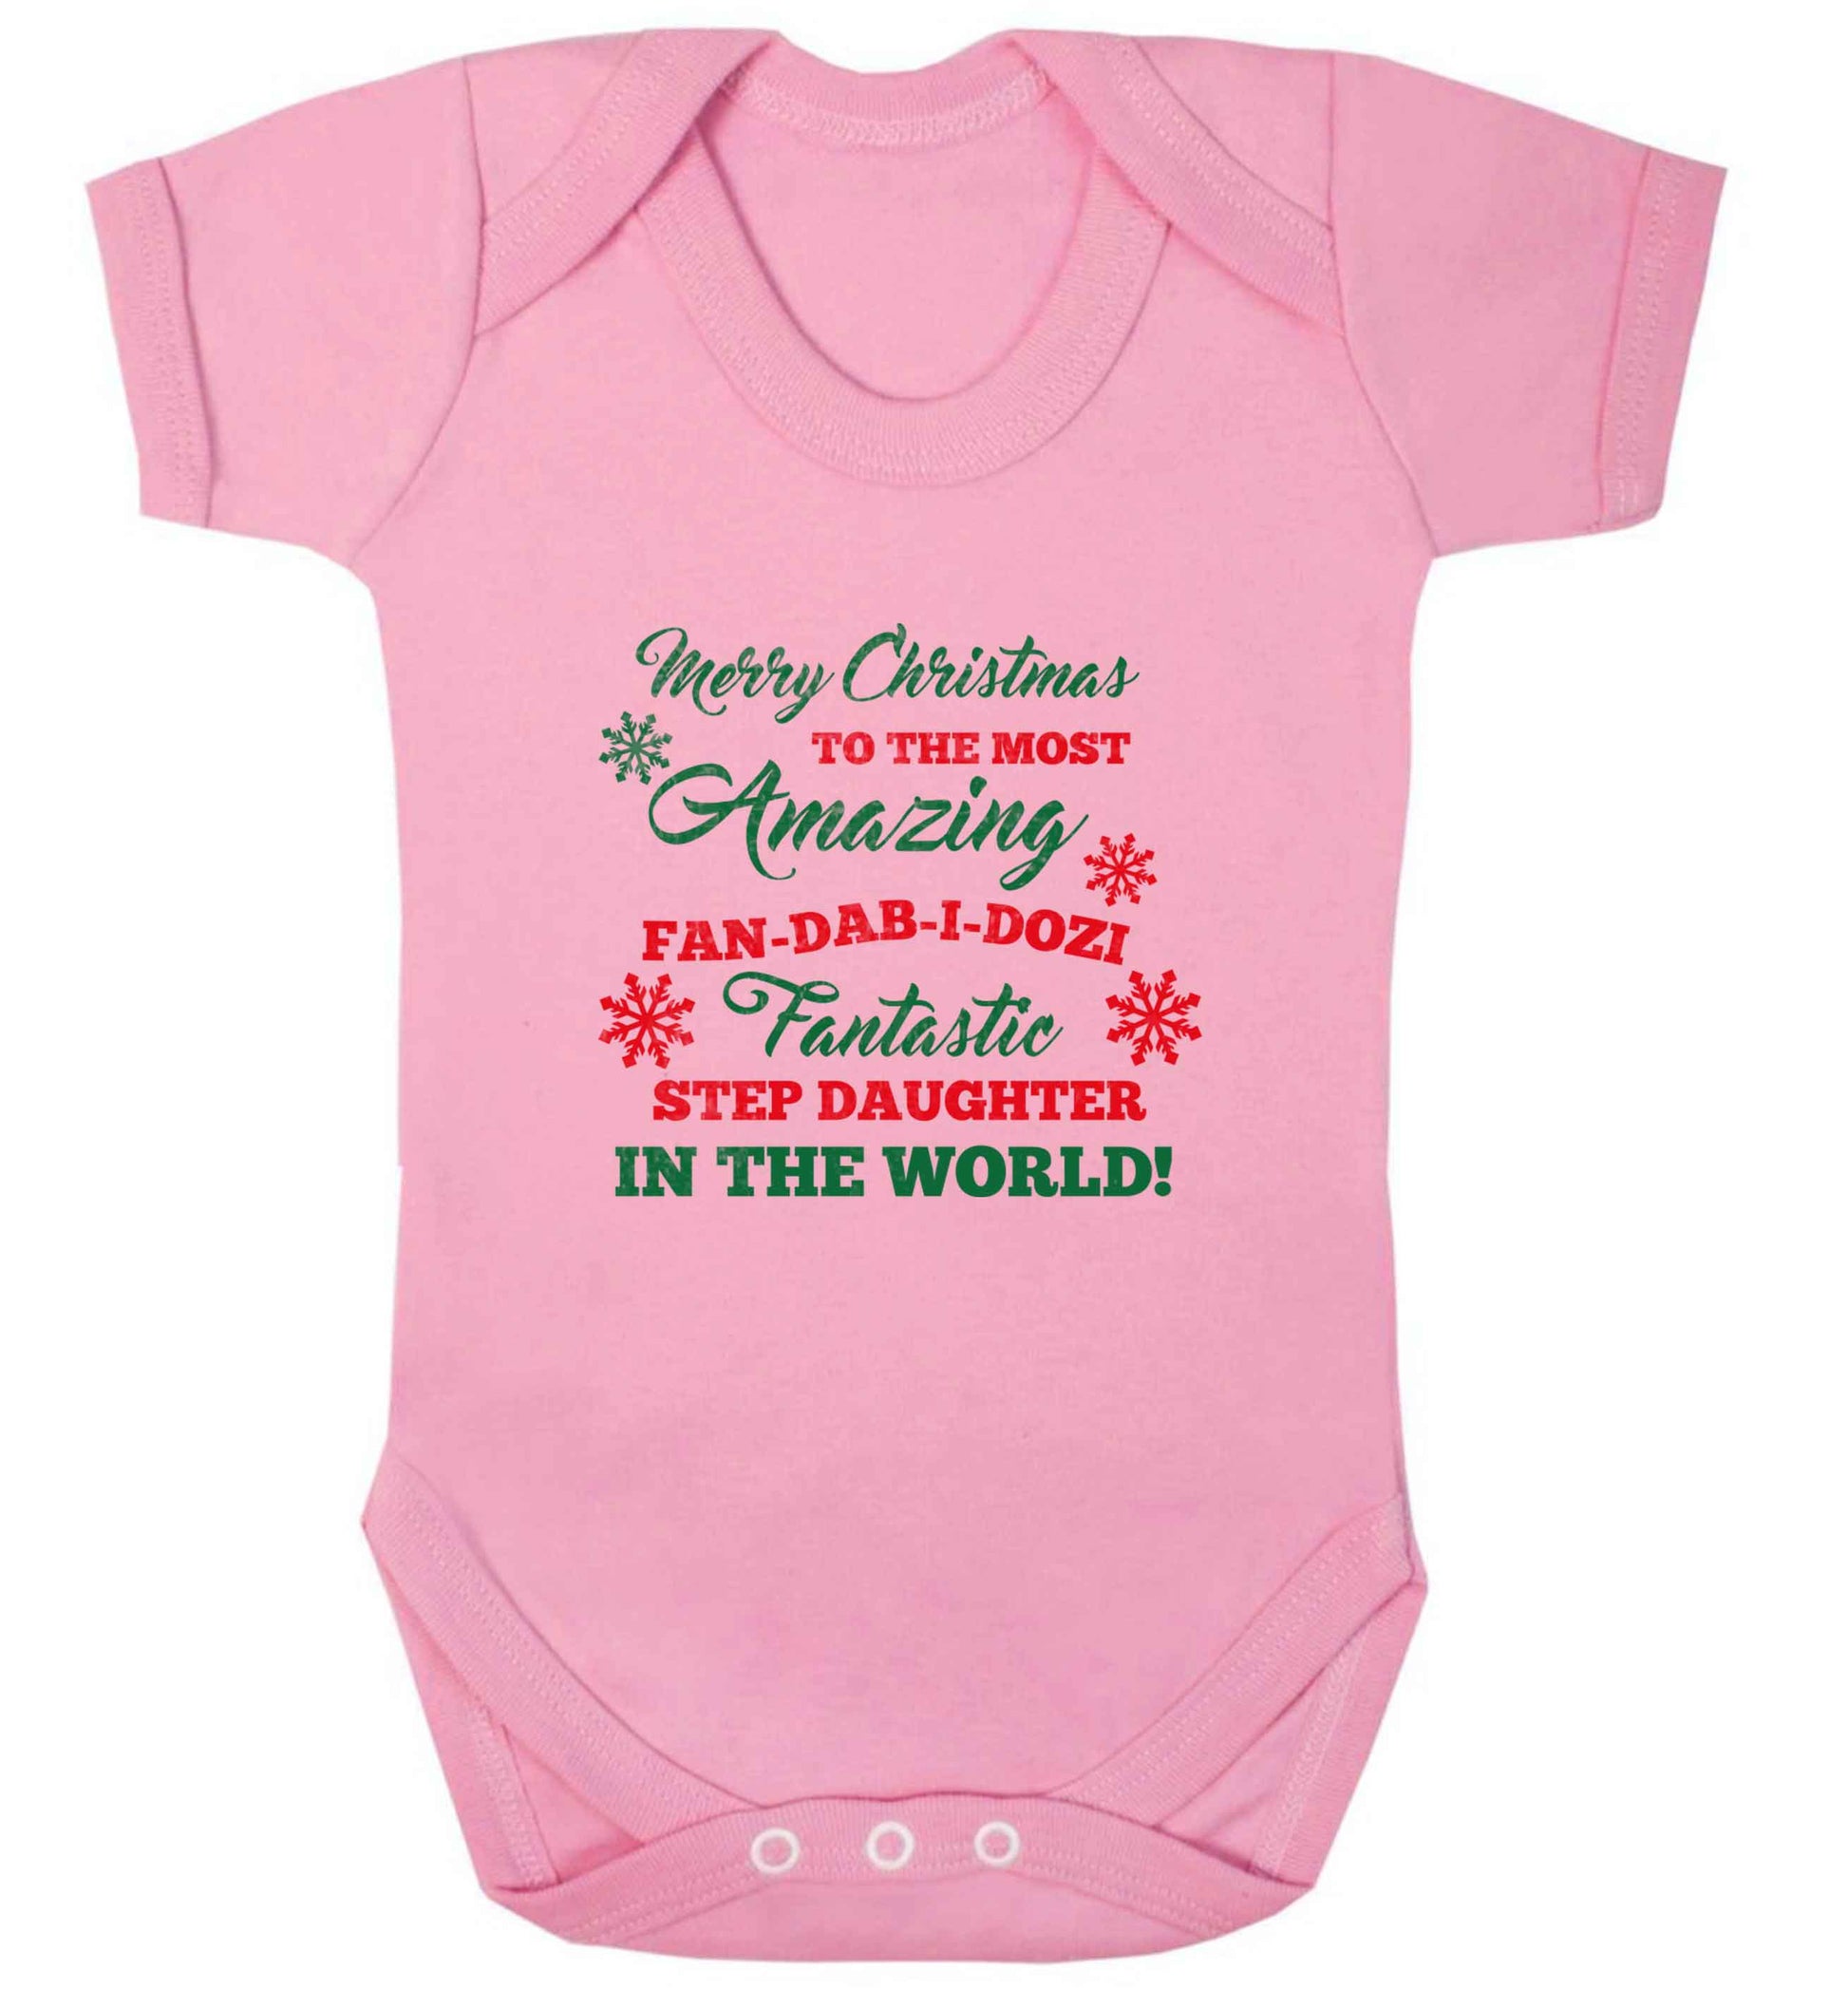 Merry Christmas to the most amazing fan-dab-i-dozi fantasic Step Daughter in the world baby vest pale pink 18-24 months